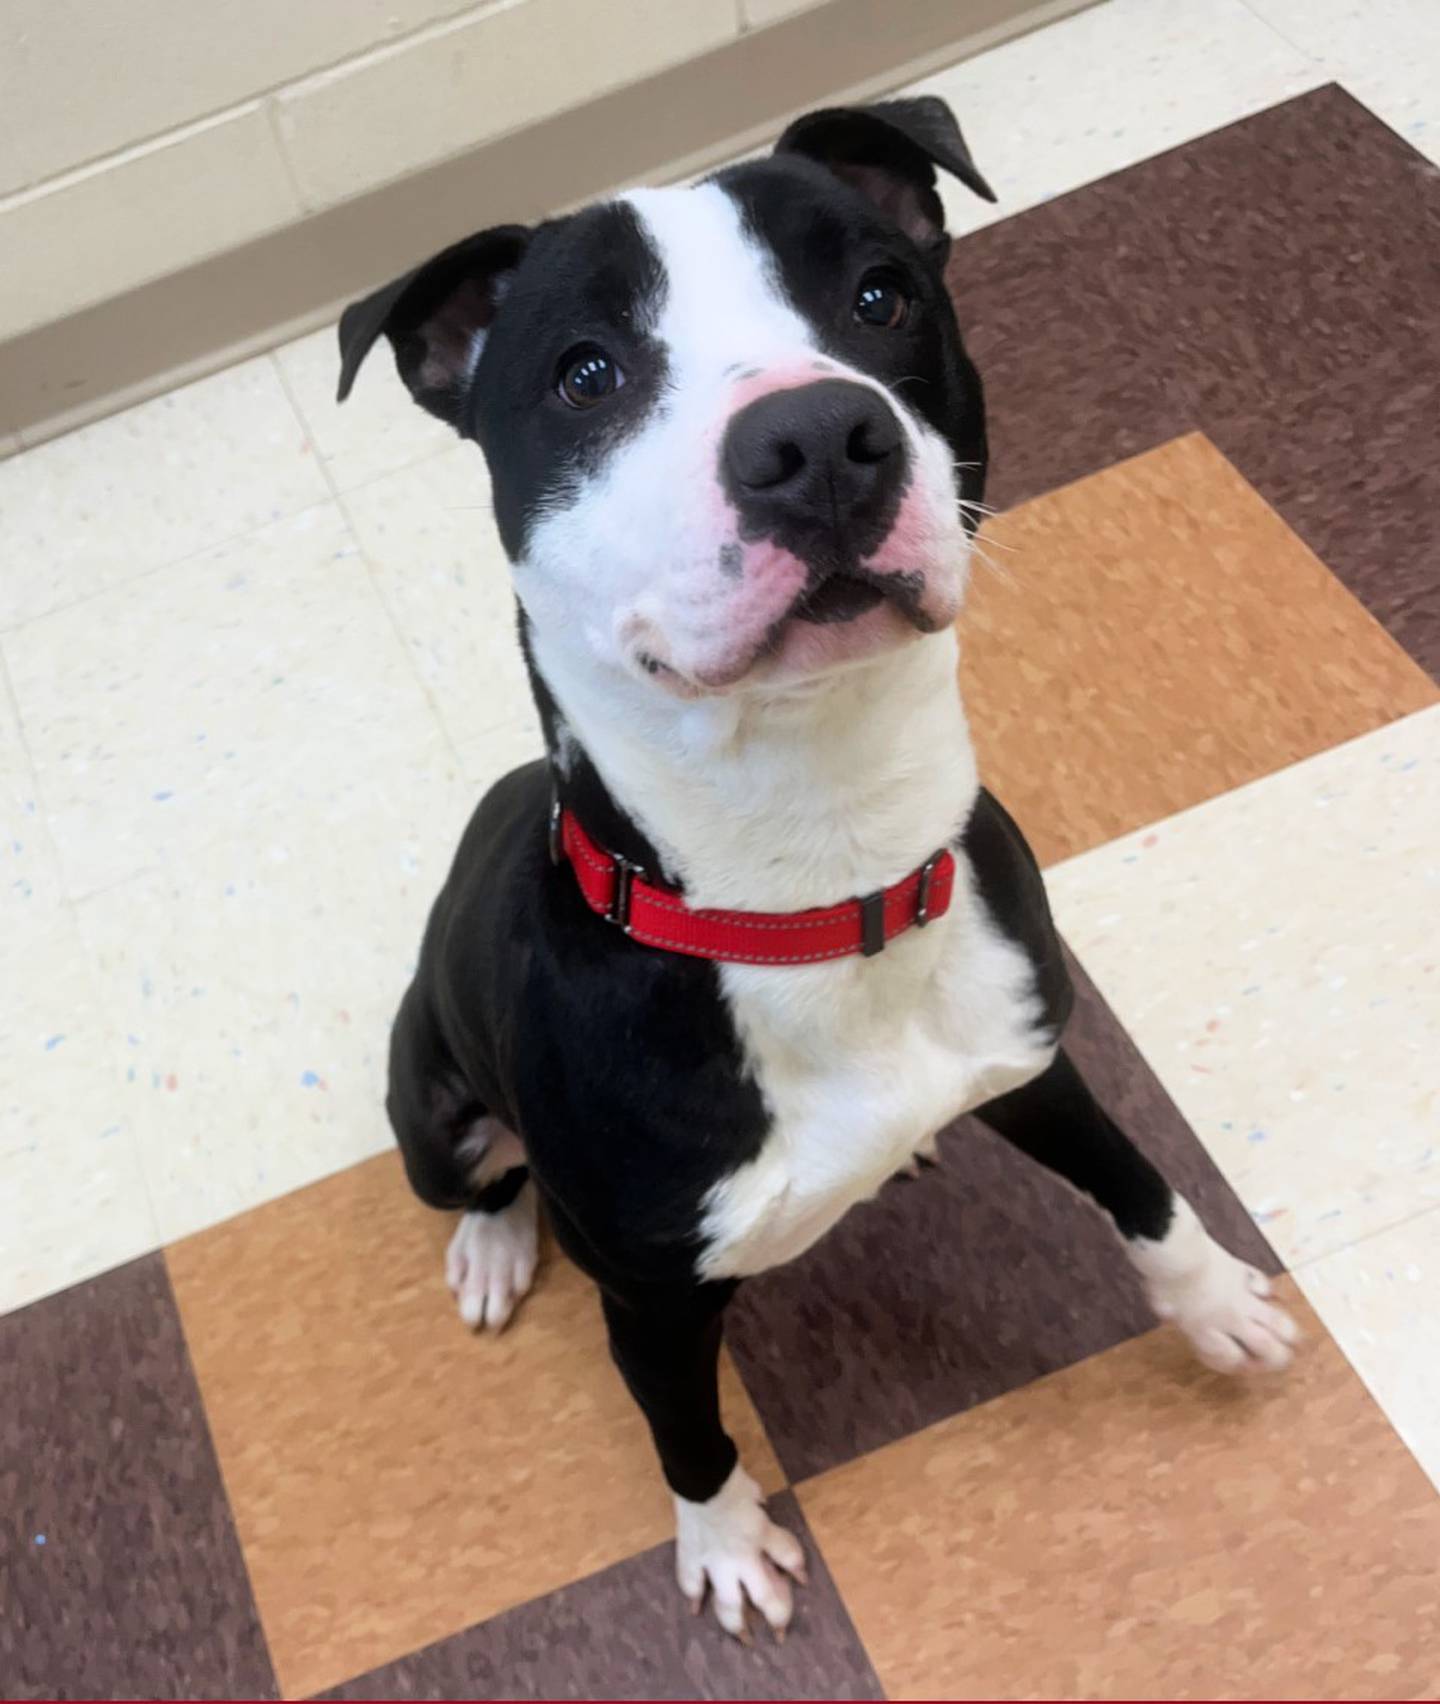 Bando is a 9-month-old pittie that likes to play and does well with other dogs. He previously lived with children and loves engaging with families, whether that’s lounging on the couch or hopping into the car for a quick errand run. To meet Bando, call Joliet Township Animal Control at 815-725-0333.